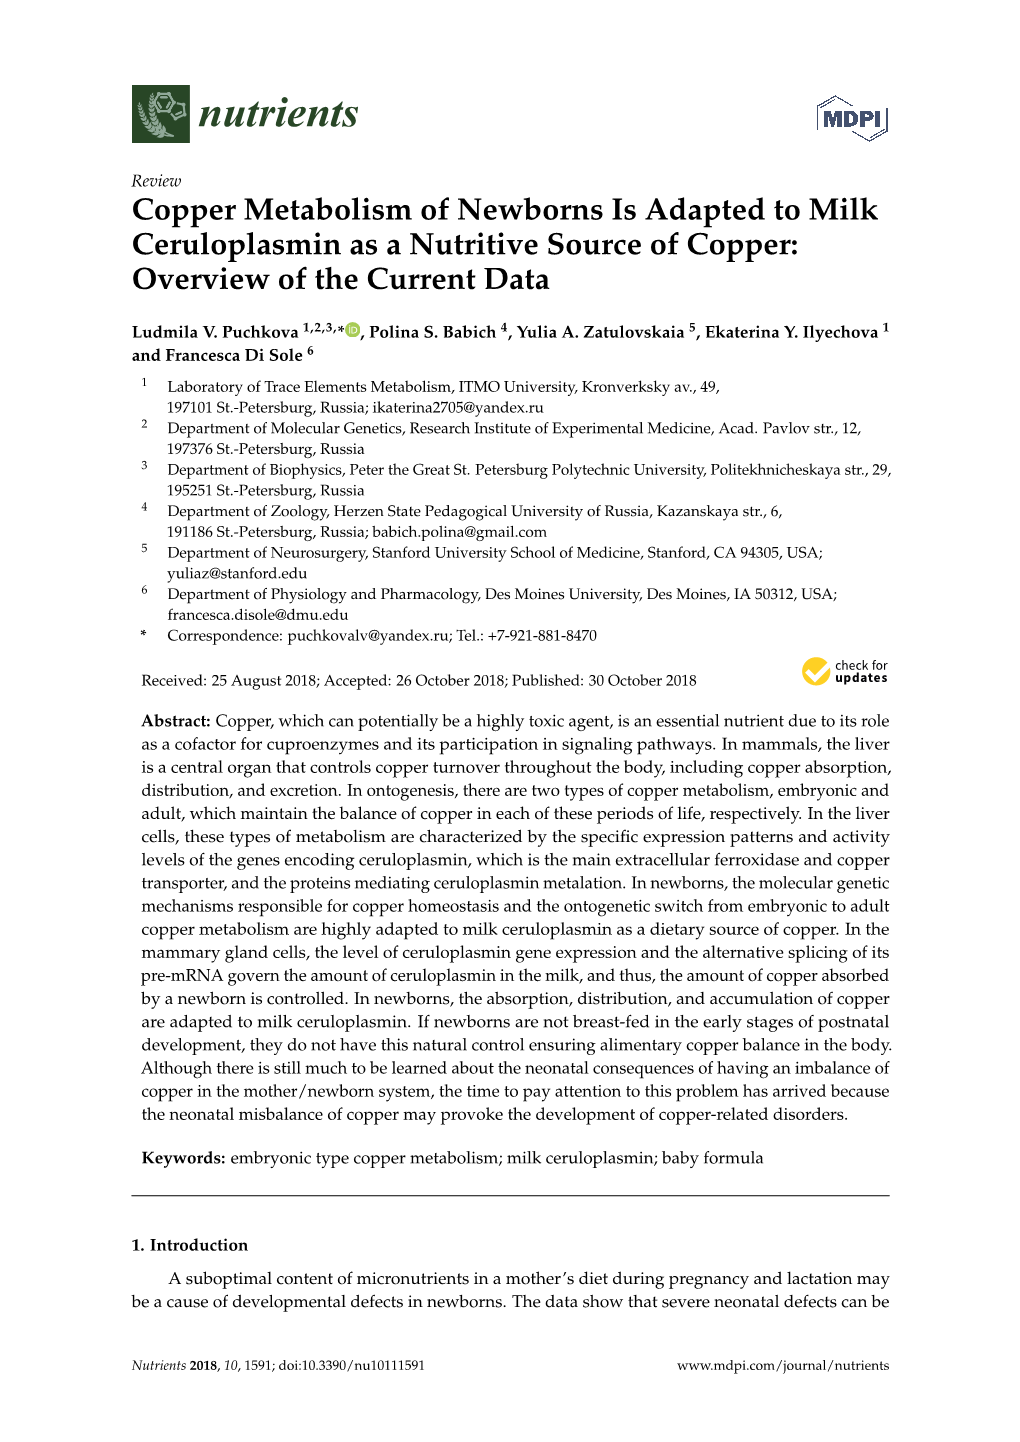 Copper Metabolism of Newborns Is Adapted to Milk Ceruloplasmin As a Nutritive Source of Copper: Overview of the Current Data